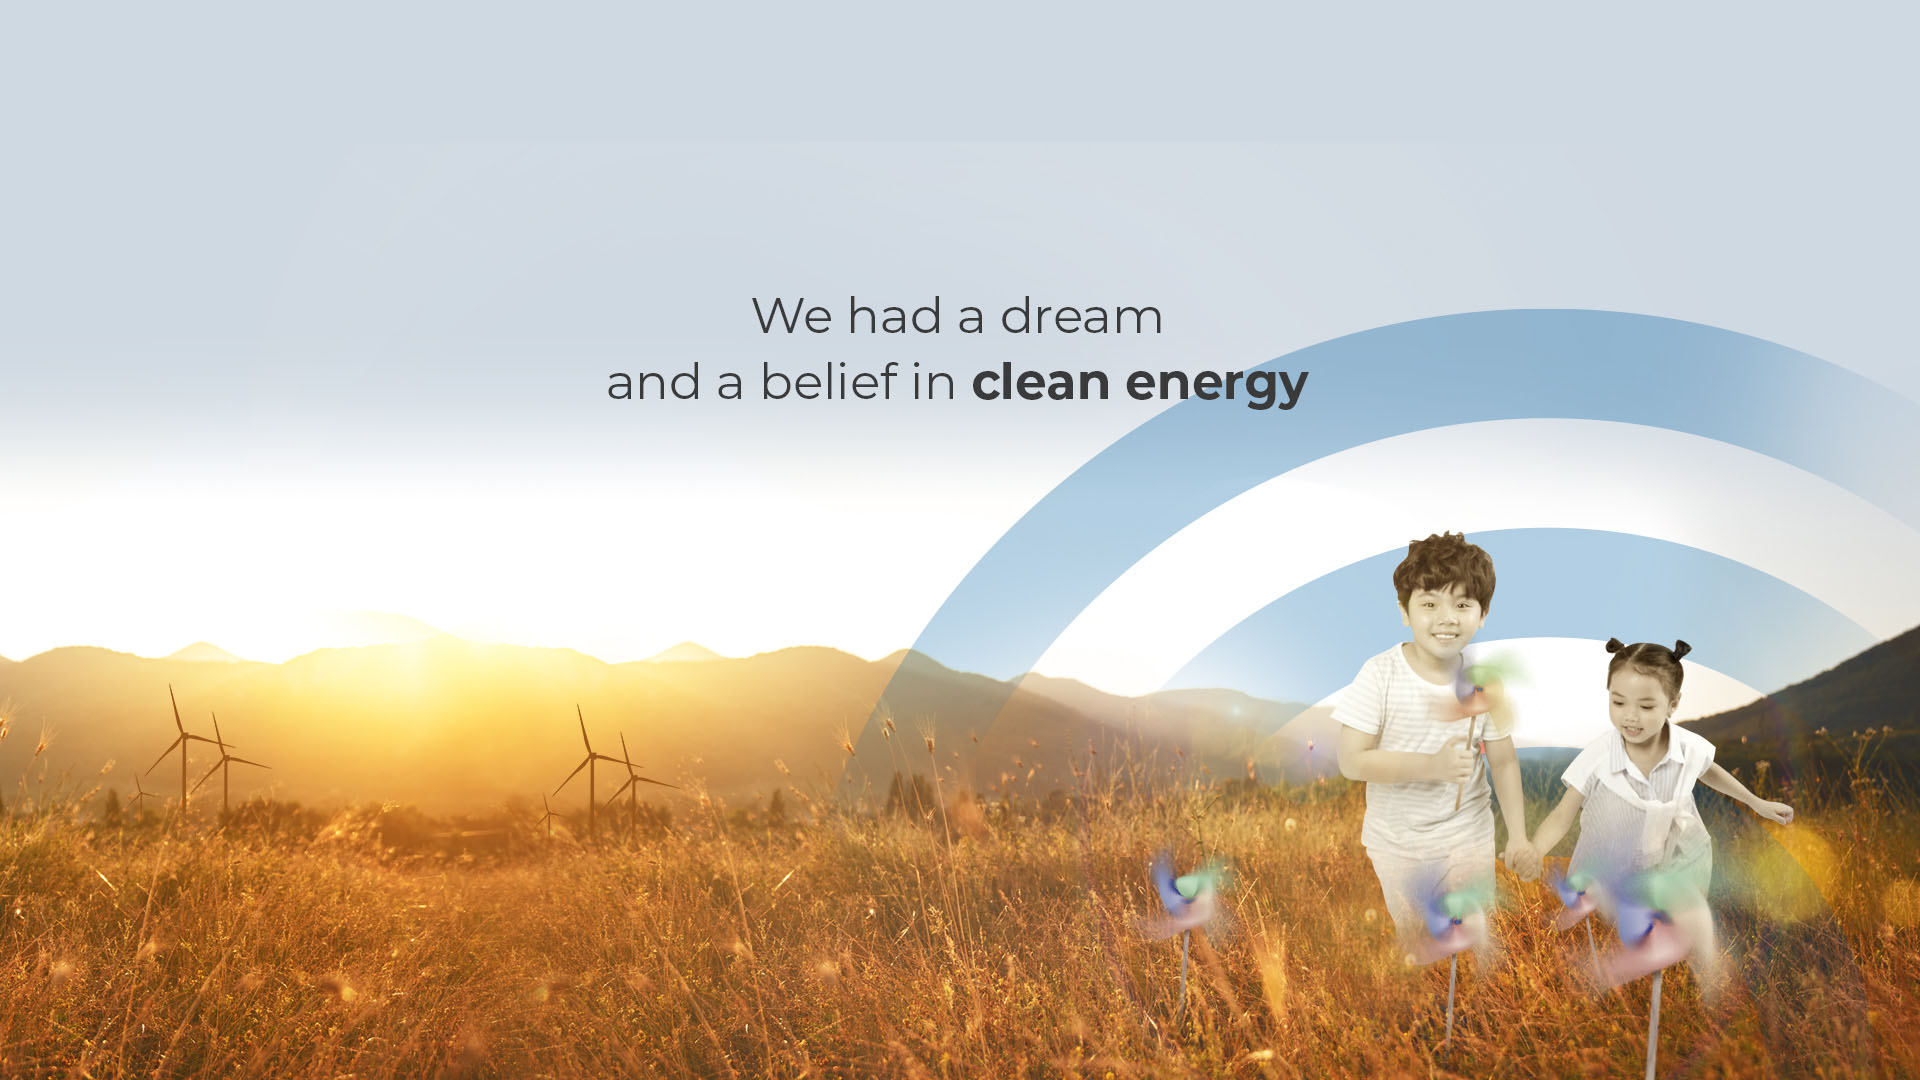 We had a dream and a belief in clean energy